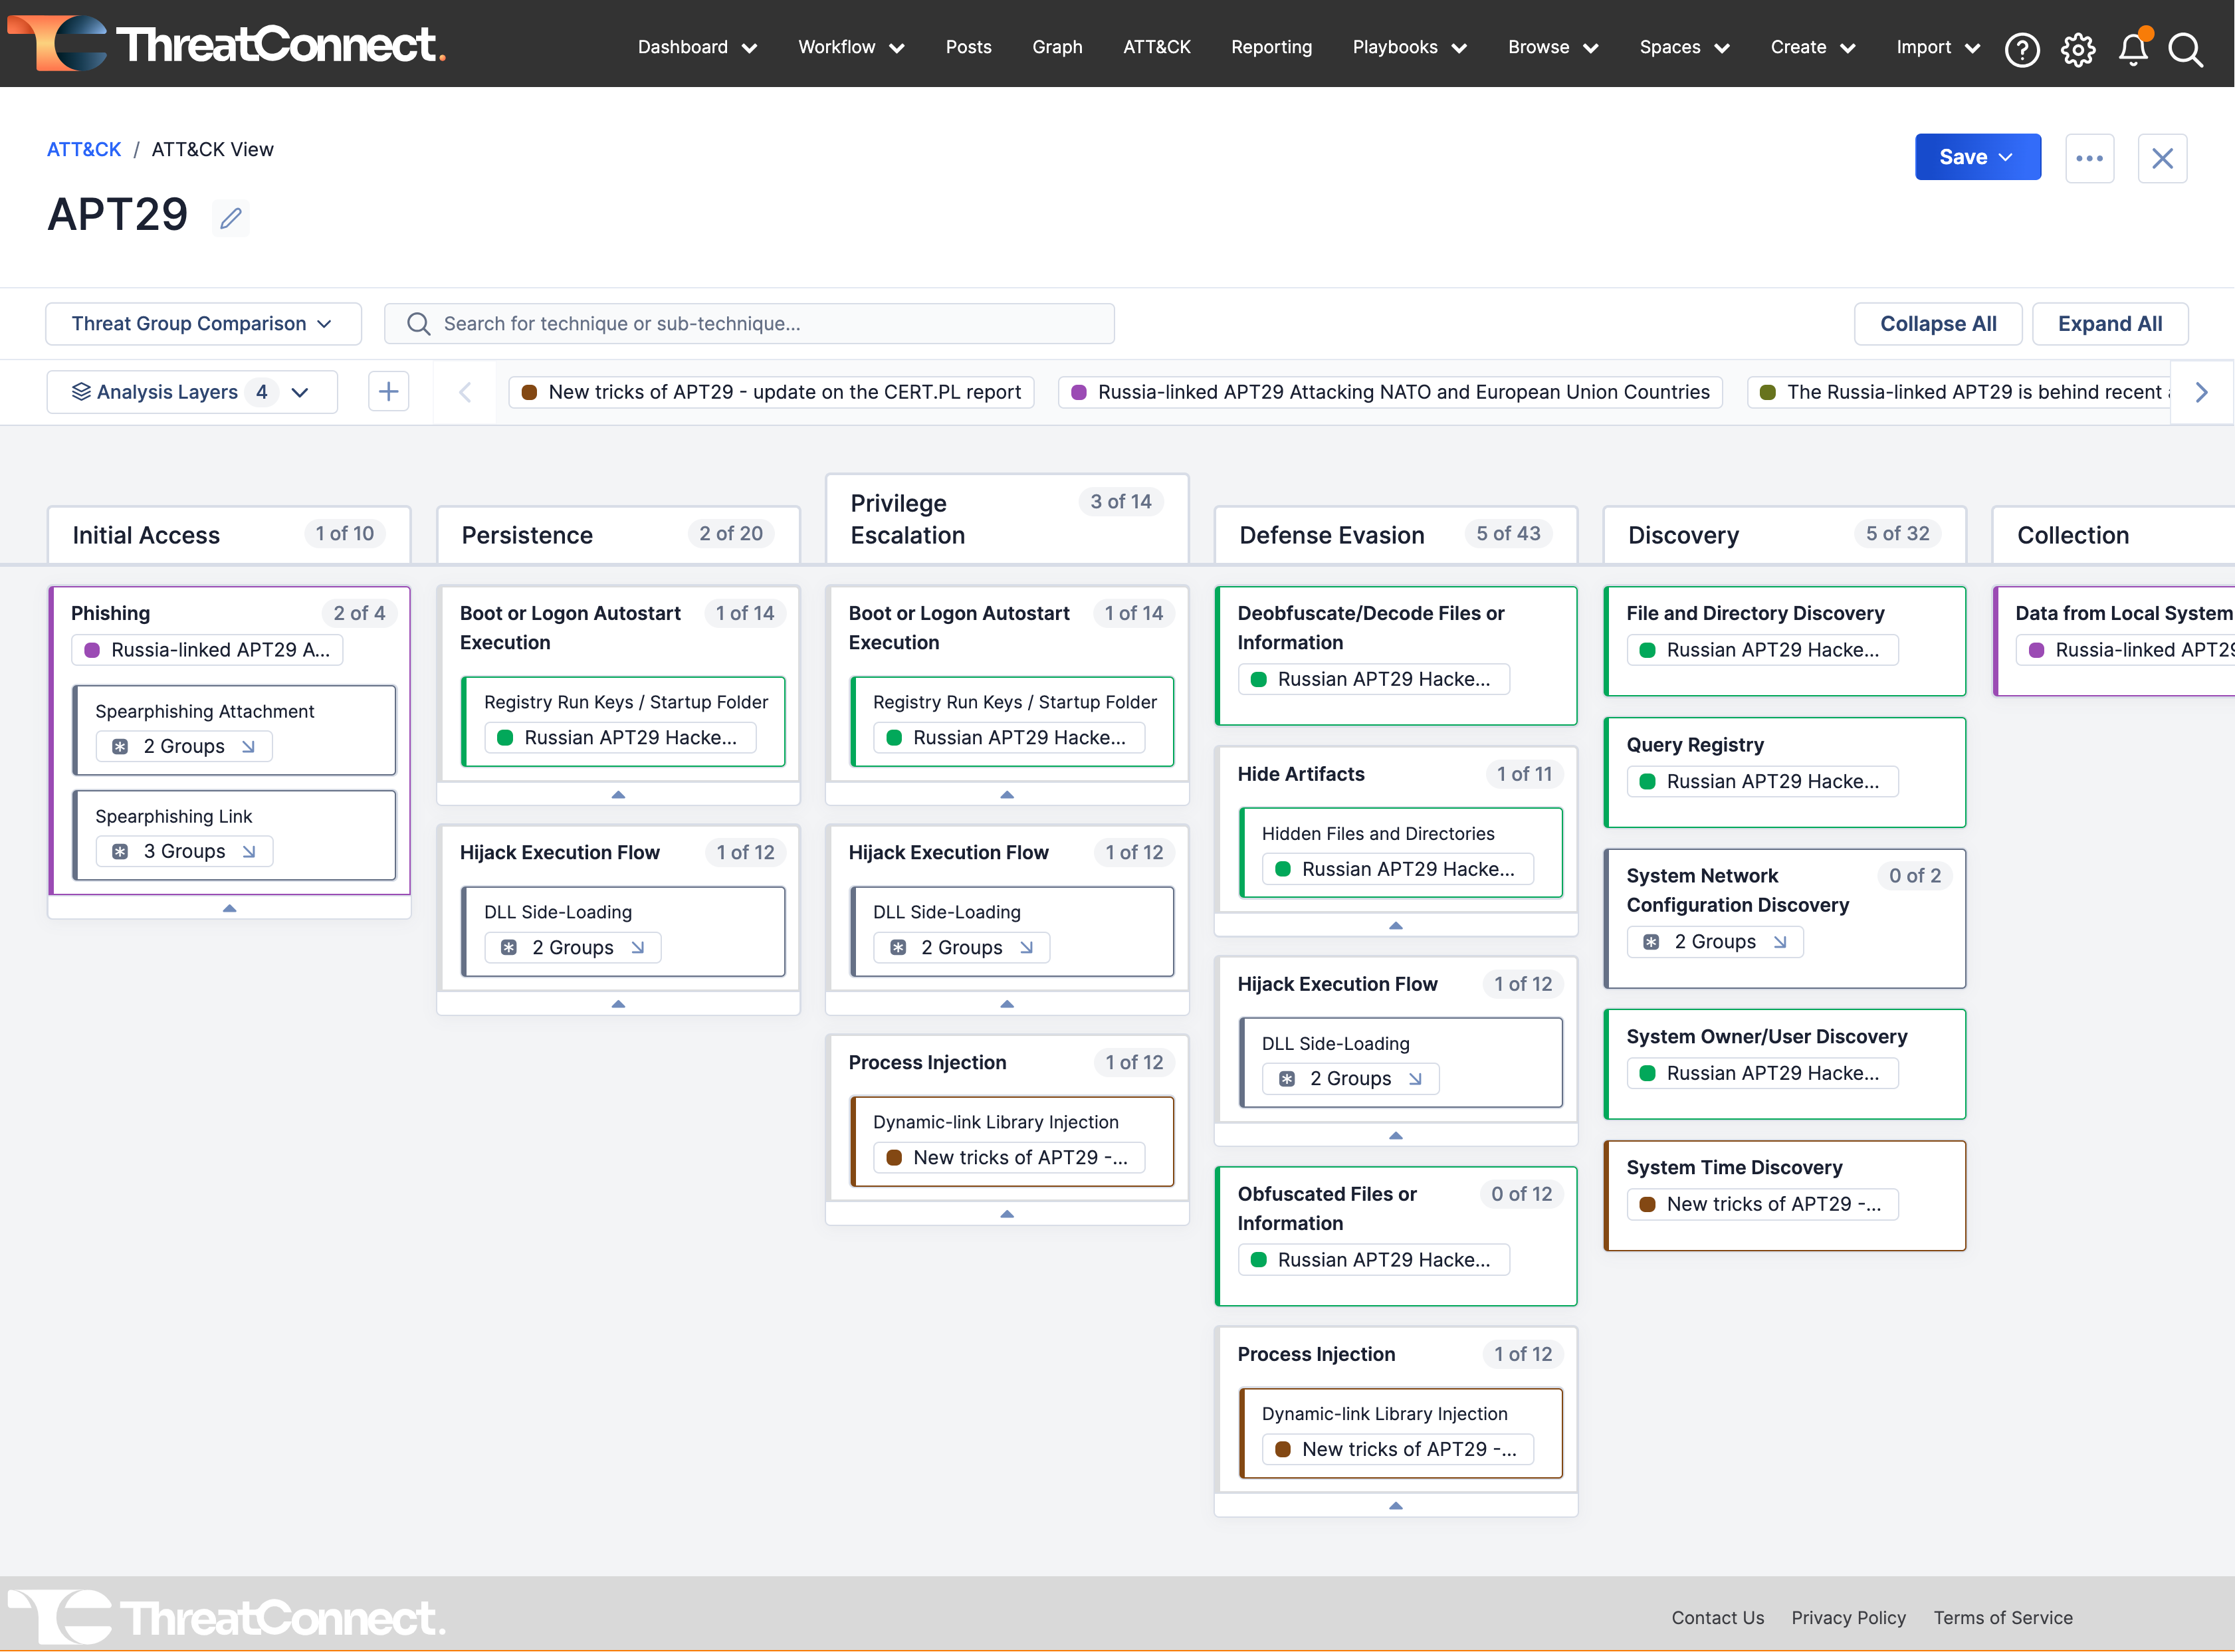 The ThreatConnect TI Ops Platform enables analysts to visually see and understand attacker behaviors using the MITRE ATT&CK framework.